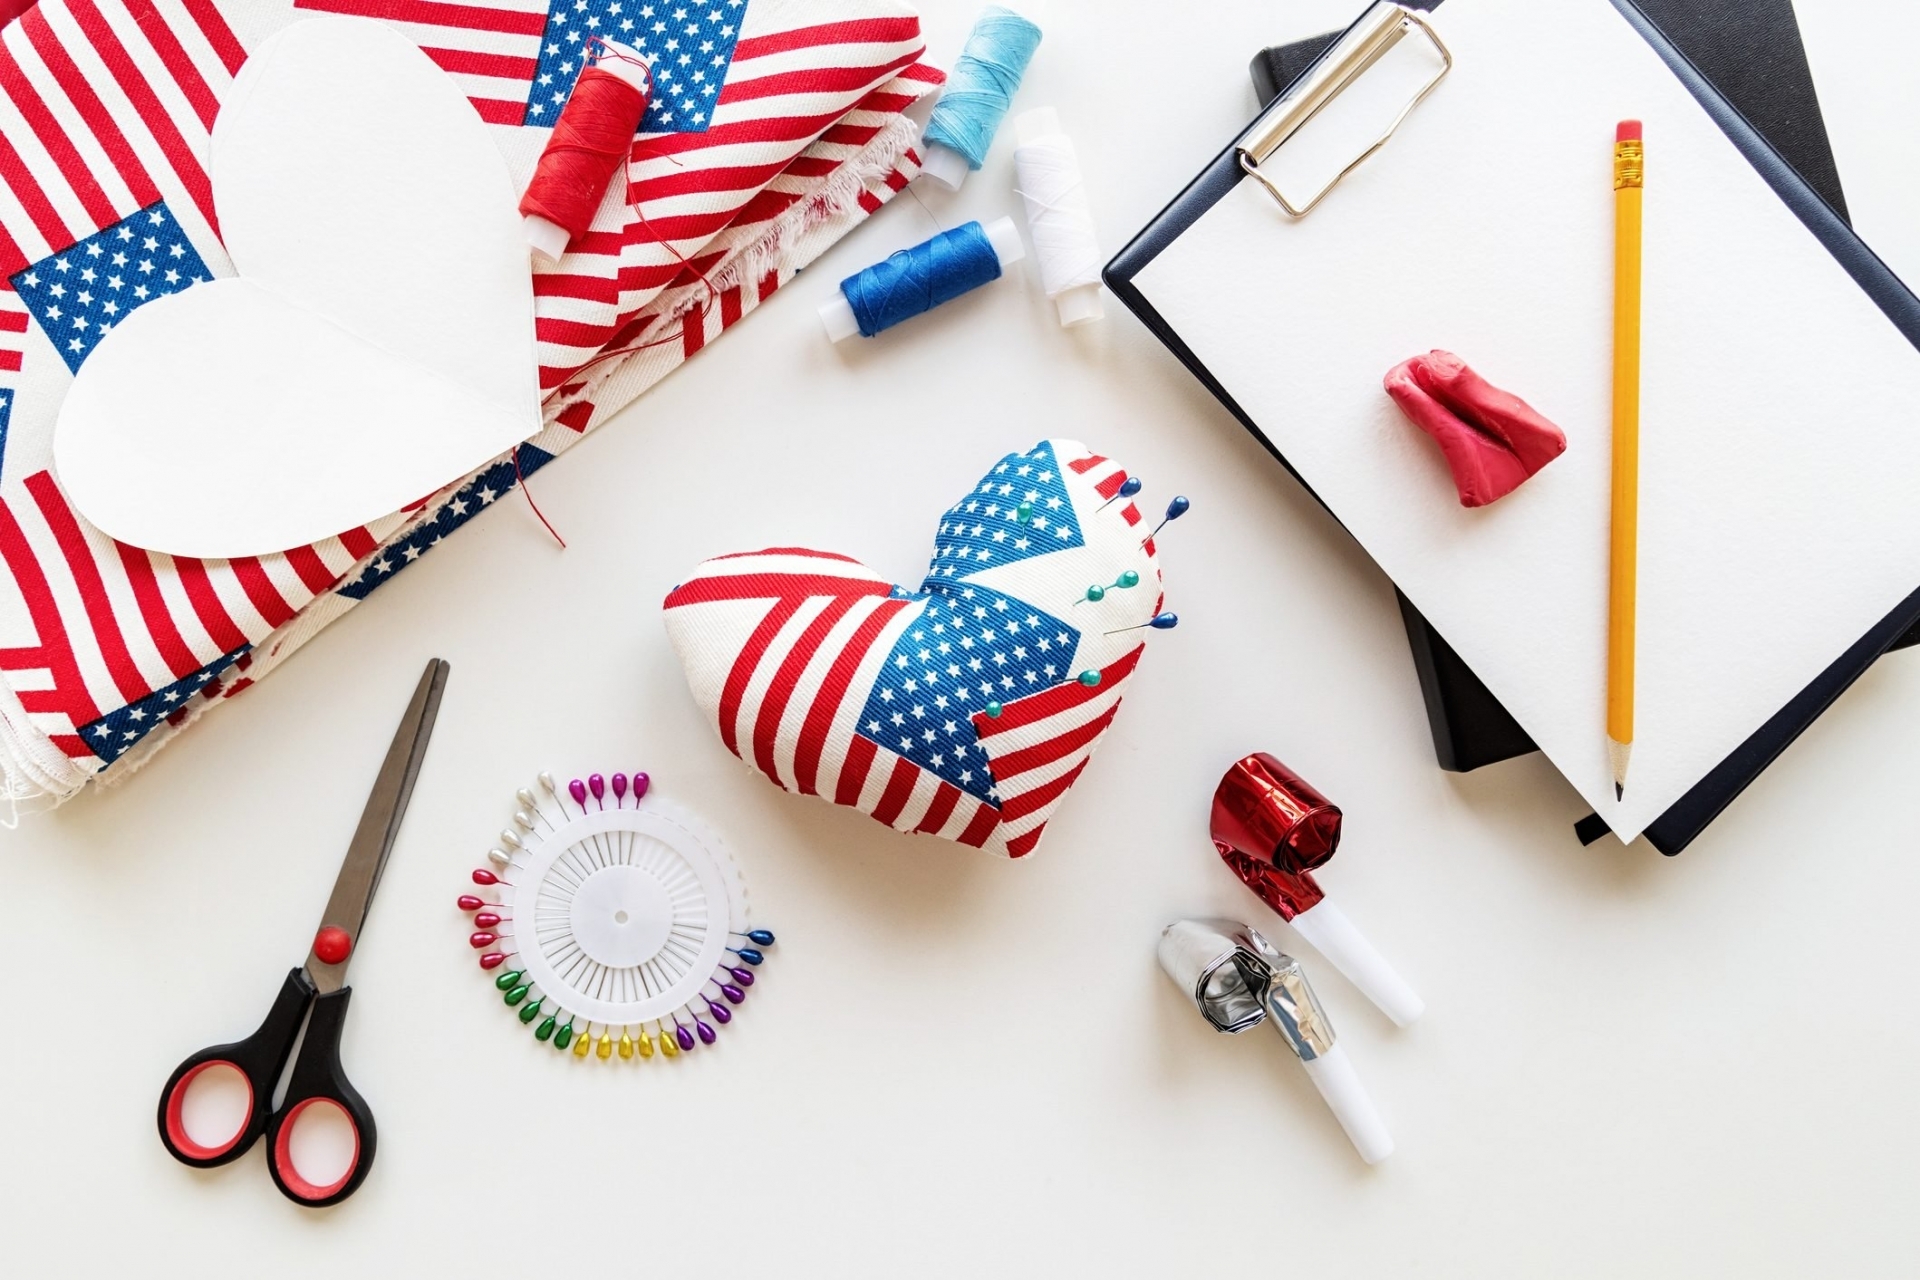 Top 25 Easiest Crafts To Make For US Independence Day (July 4)